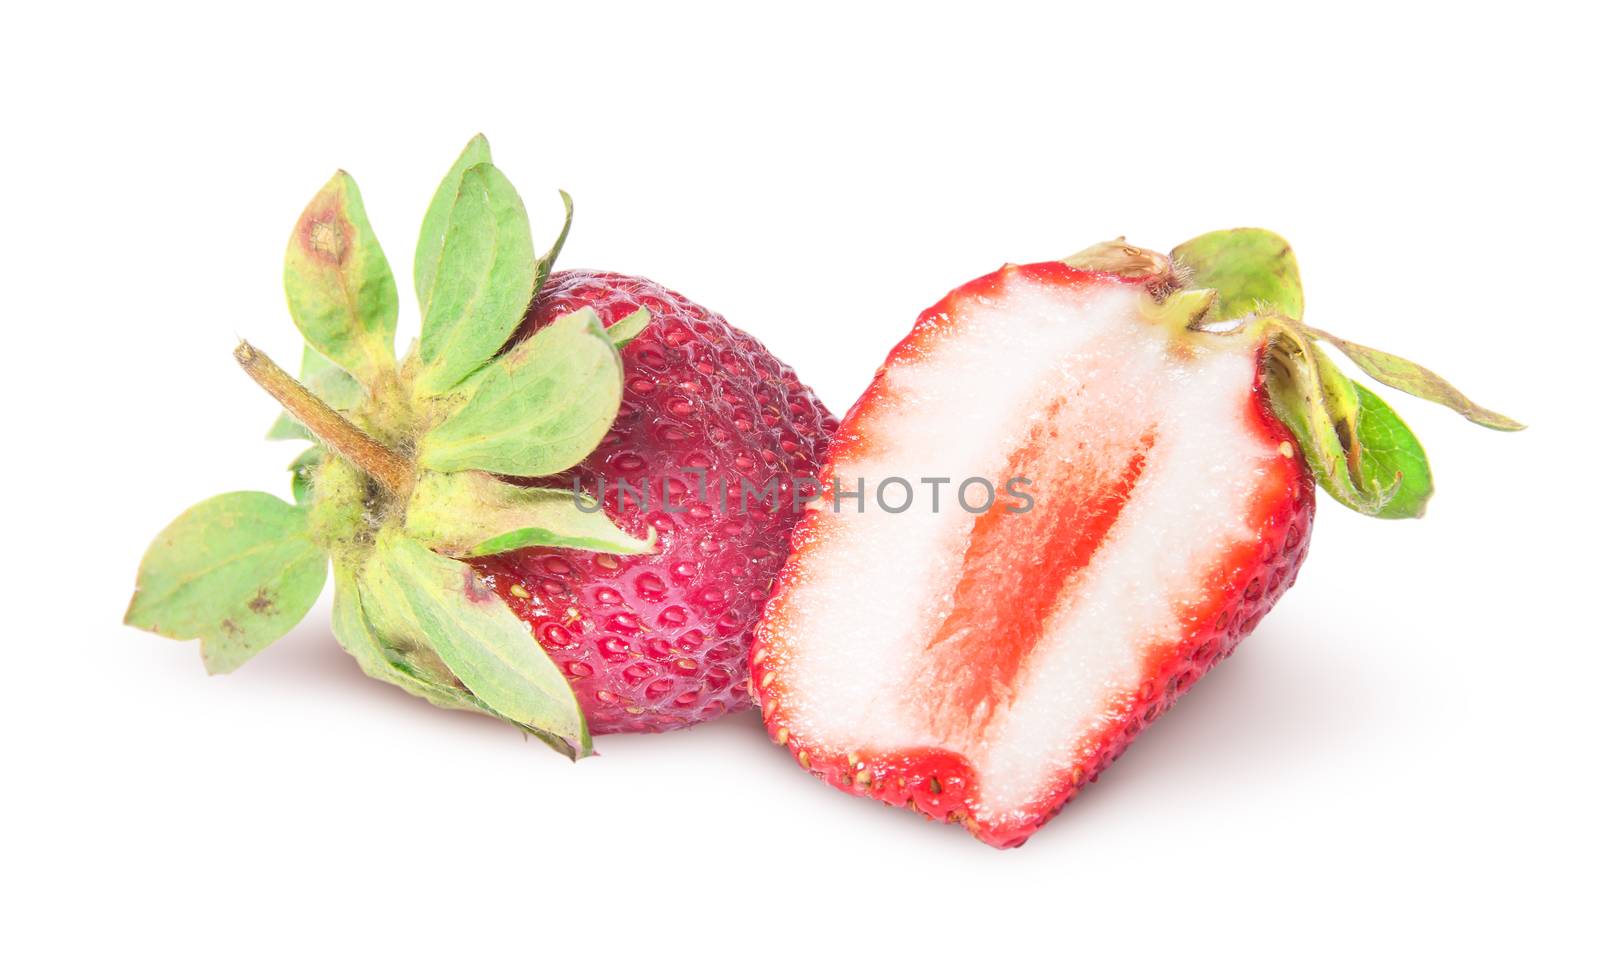 One whole and half juicy strawberries by Cipariss